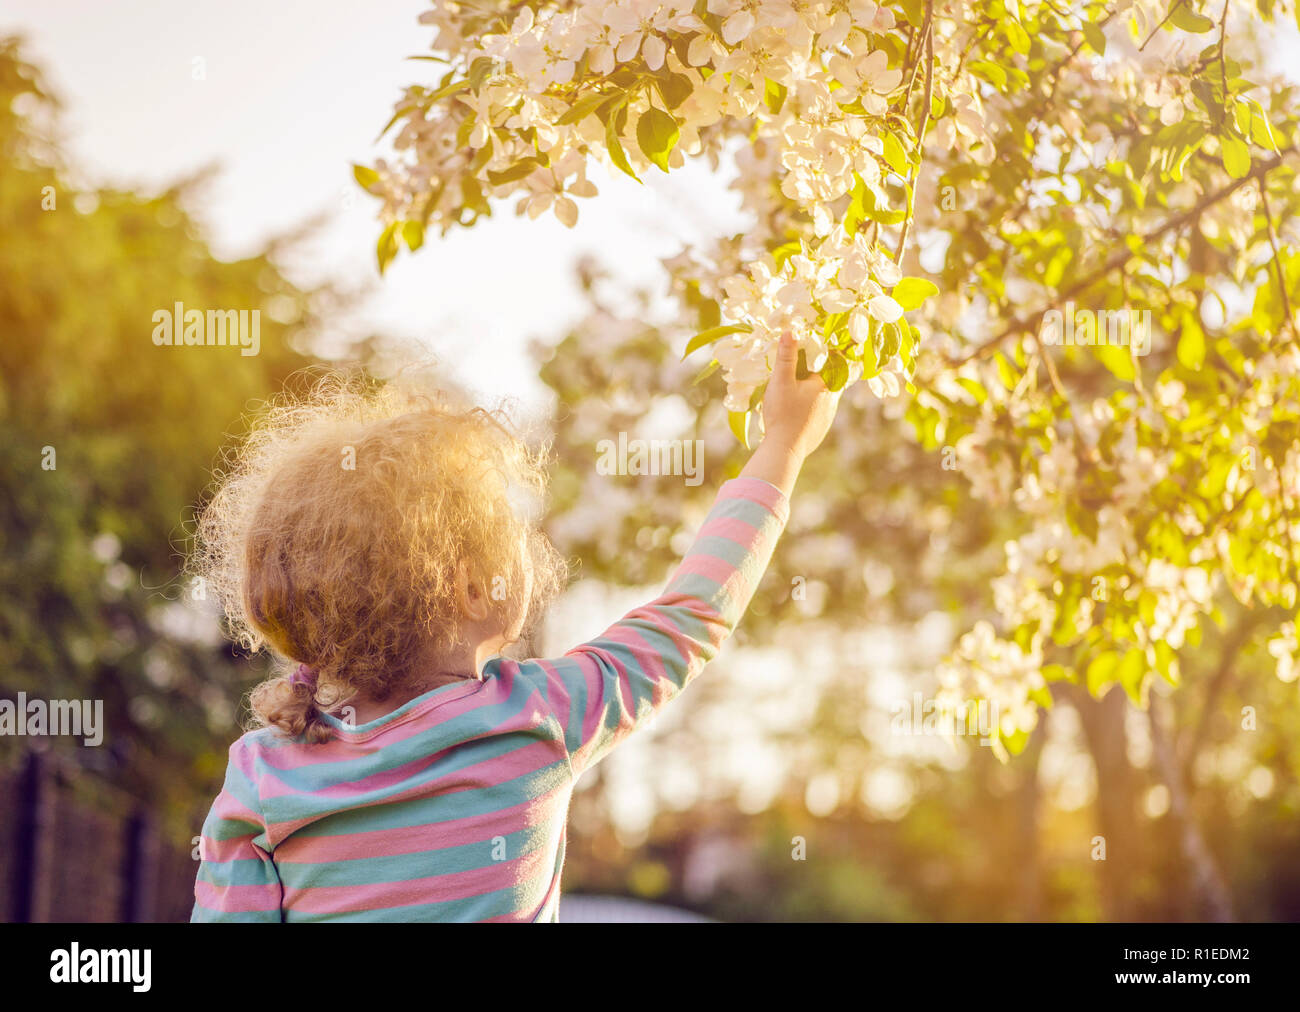 Selective focus on young blonde curly hair girl reaching out to a beautiful apple tree blossoms in spring outdoors, hope concept. Golden hour light. Stock Photo